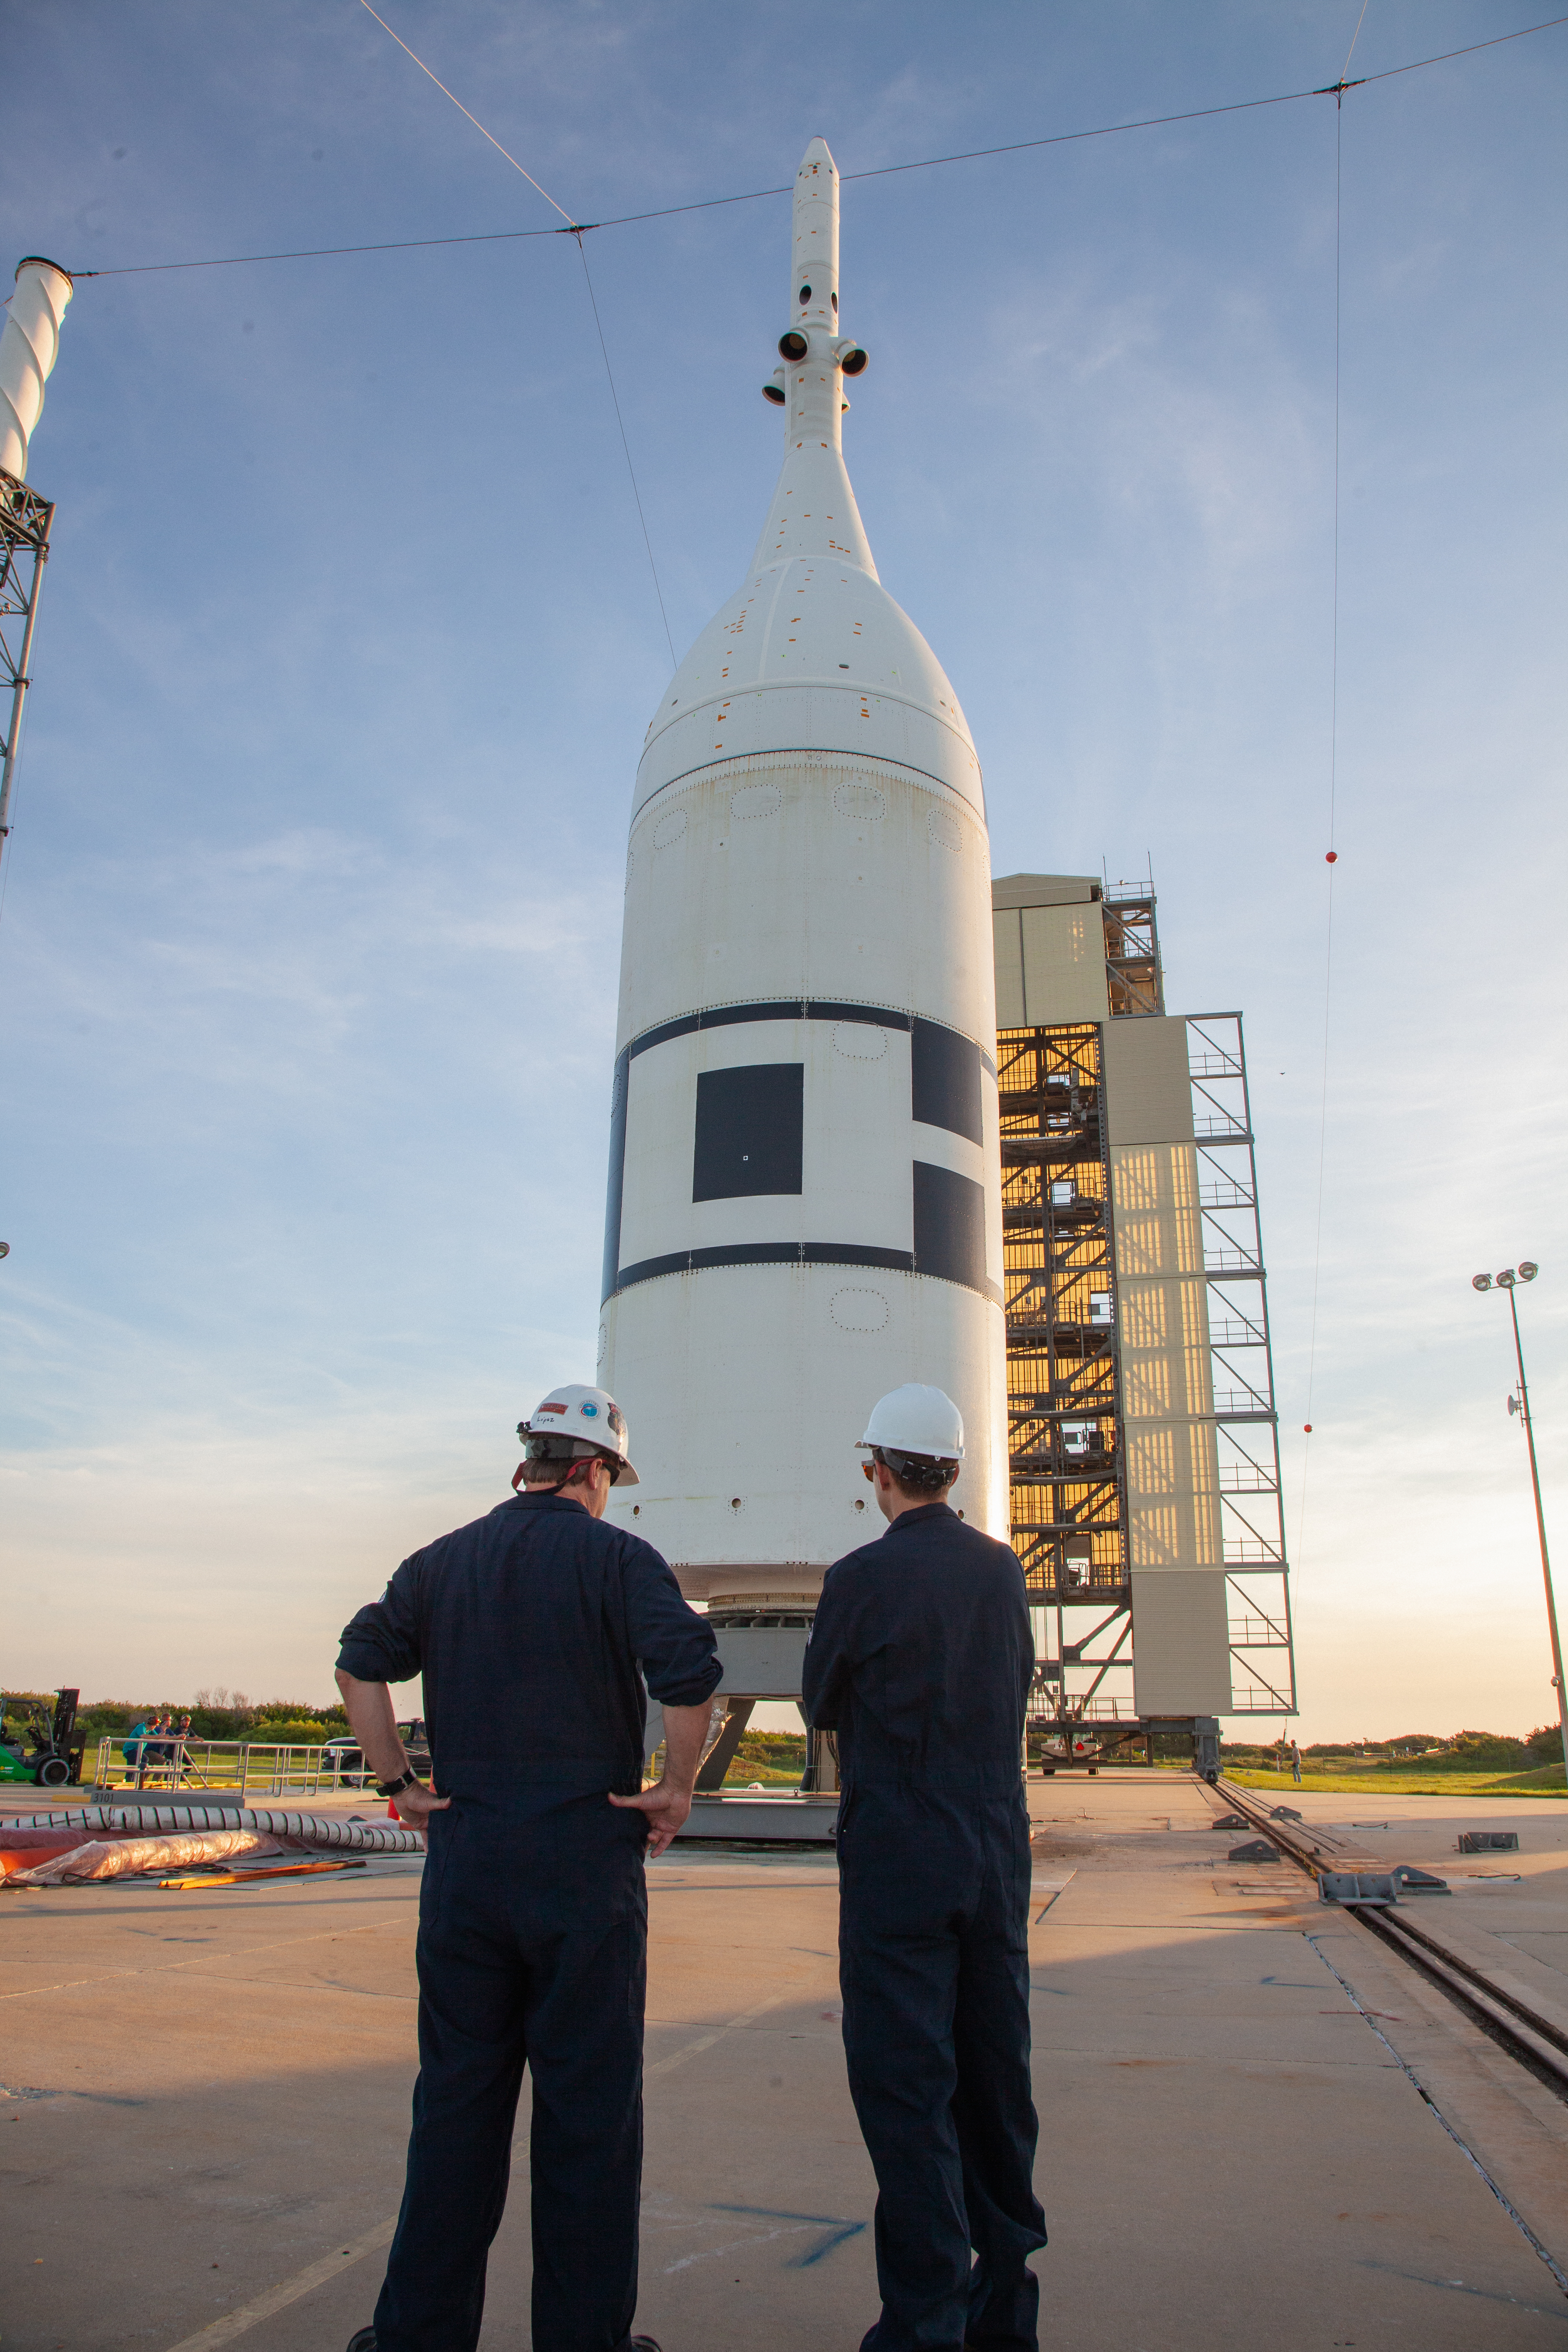 The Ascent Abort-2 test vehicle is secured on the pad at Launch Complex 46 at Cape Canaveral Air Force Station in Florida after rollback of the vertical integration facility on July 1, 2019.